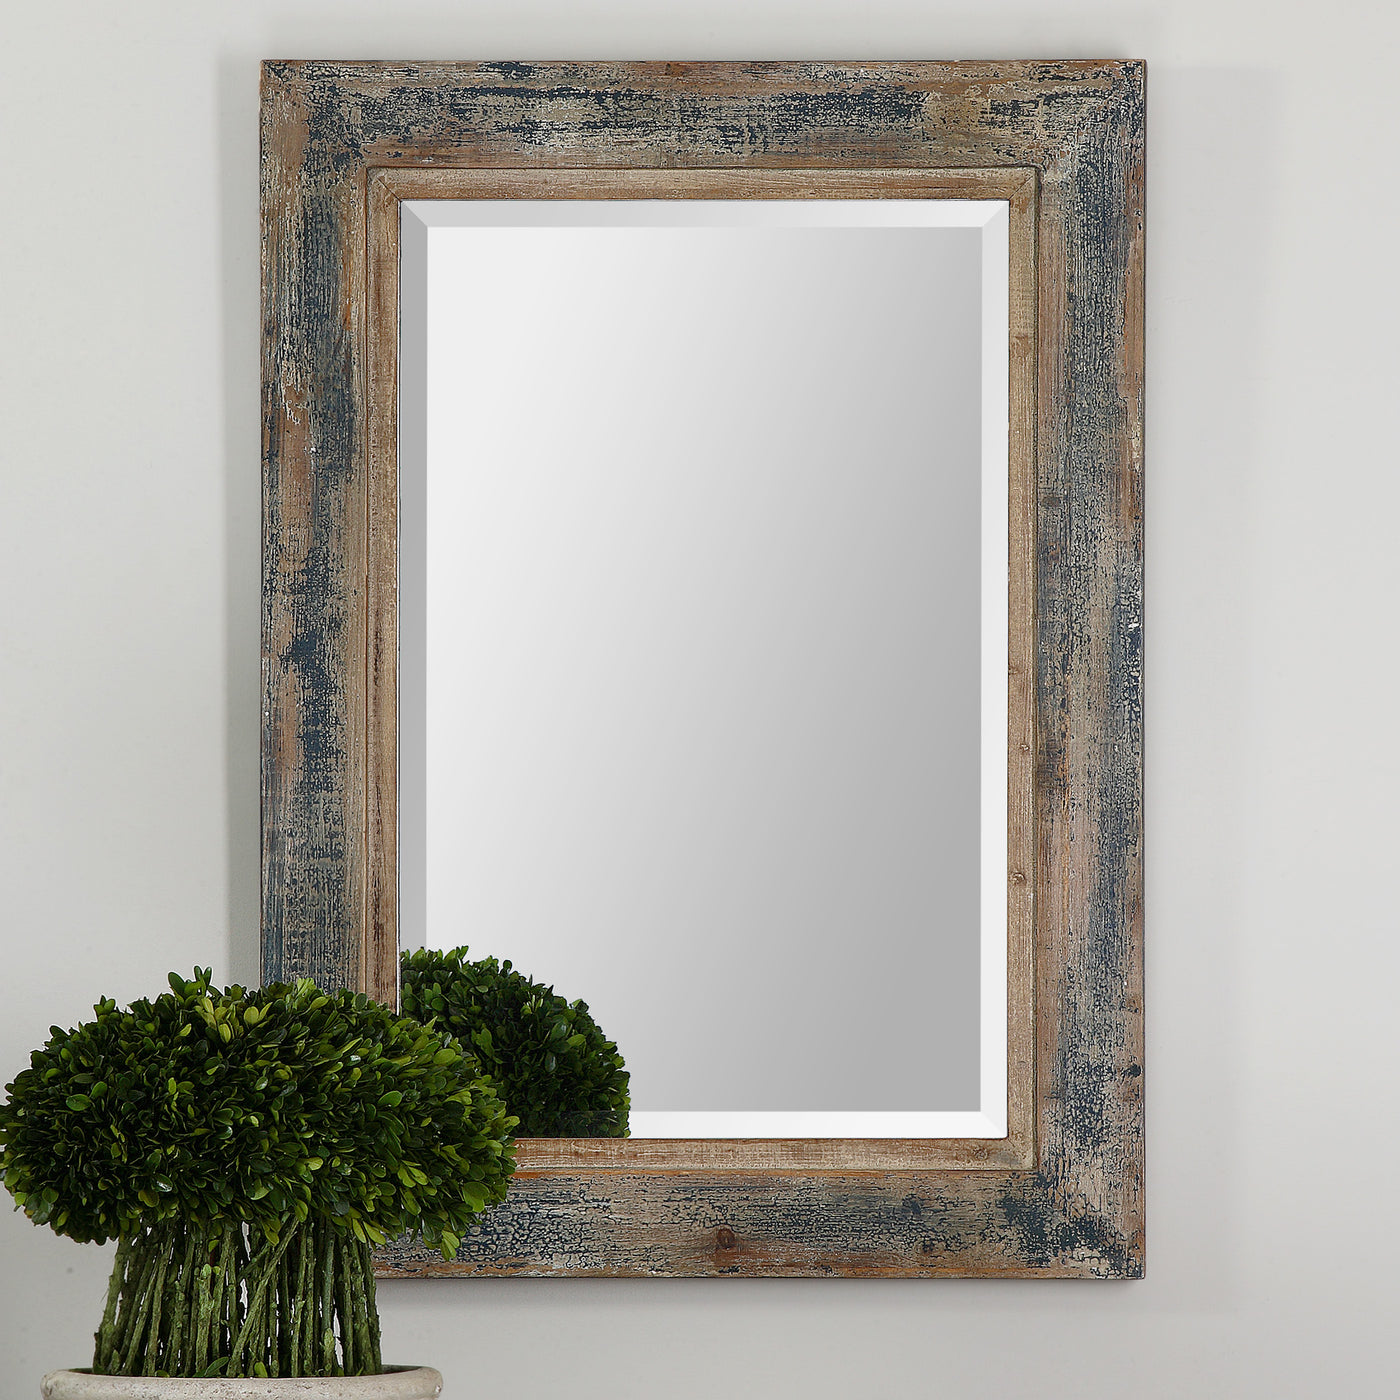 Heavily Distressed, Slate Blue Frame With Aged Wood Undertones And Rustic Ivory Accents. Mirror Has A Generous 1 1/4" Bevel.